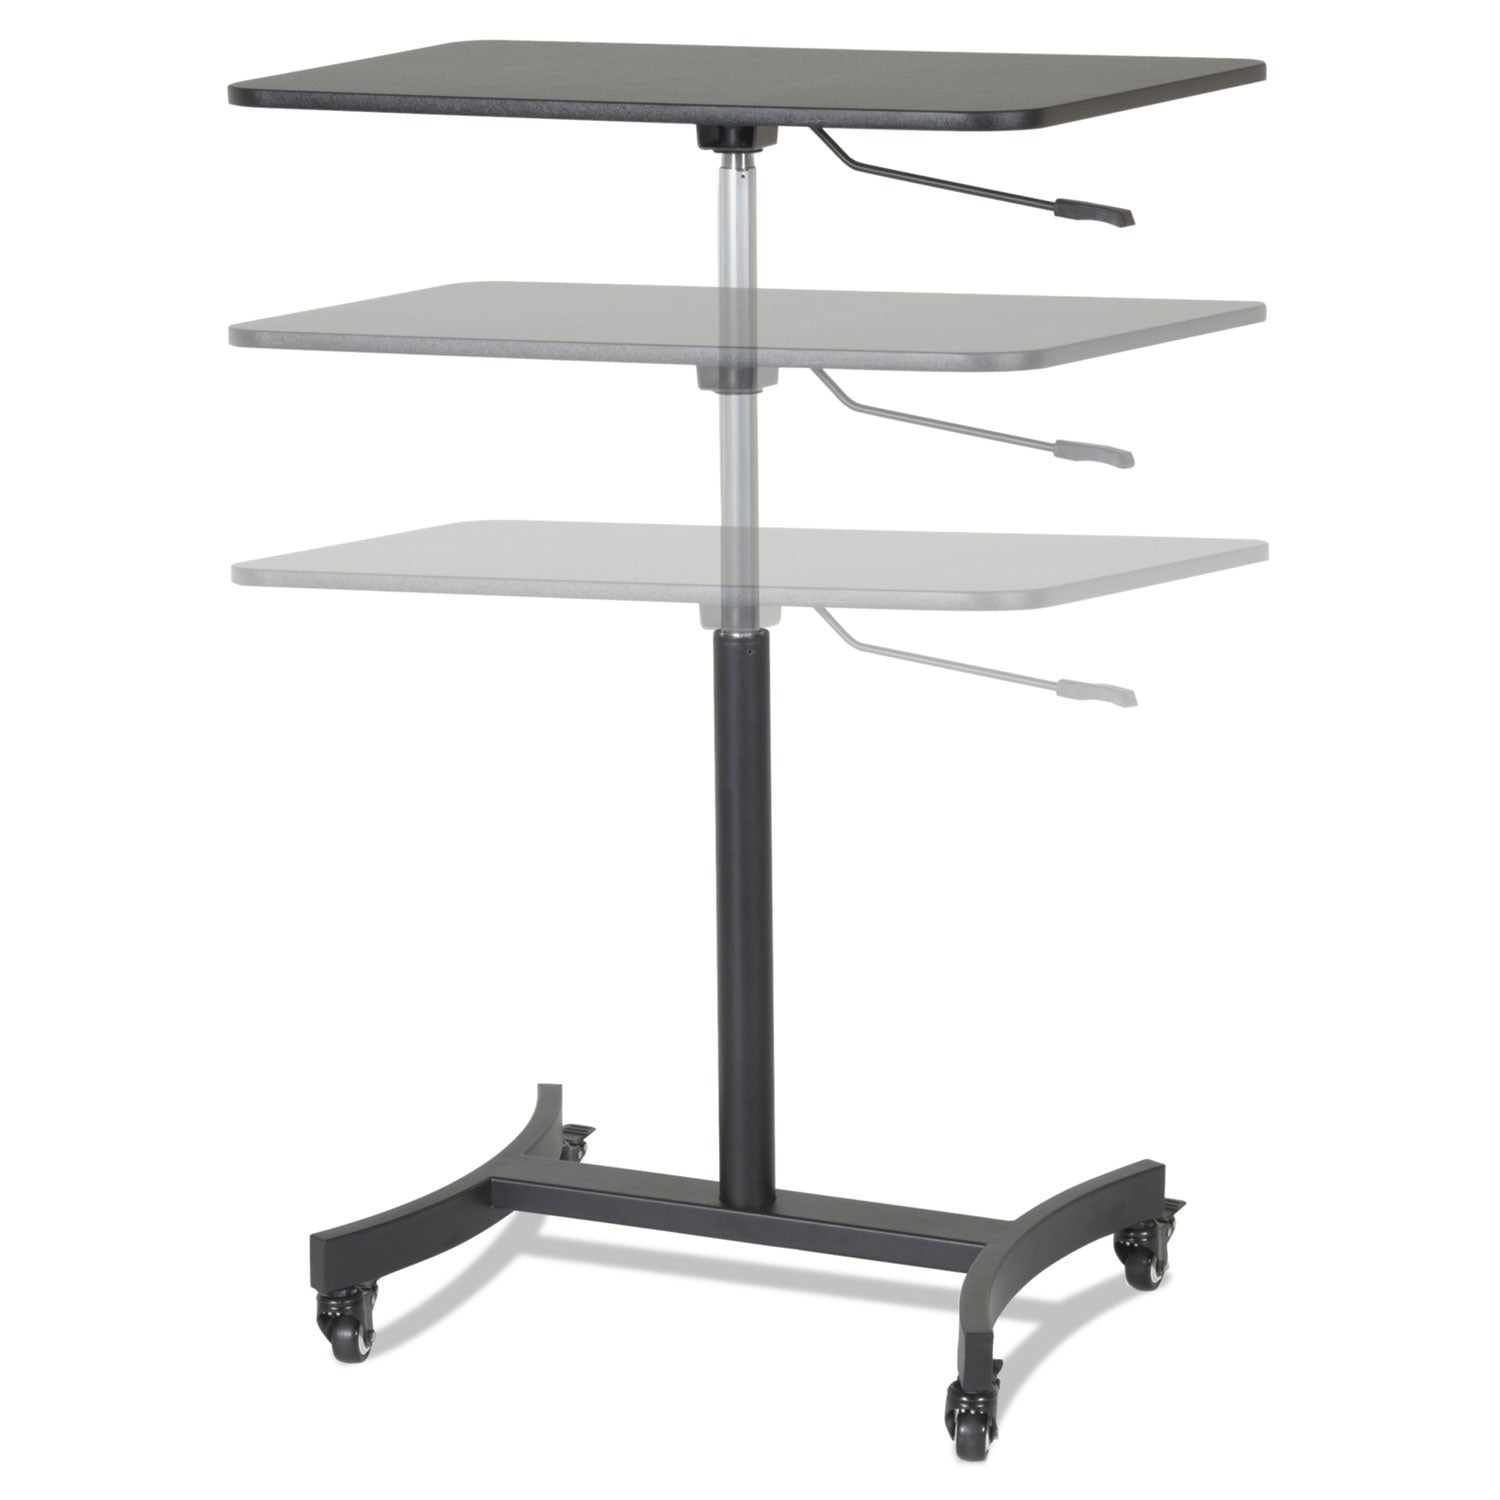 dc500-high-rise-collection-mobile-adjustable-standing-desk-3075-x-22-x-29-to-44-black_vctdc500 - 1